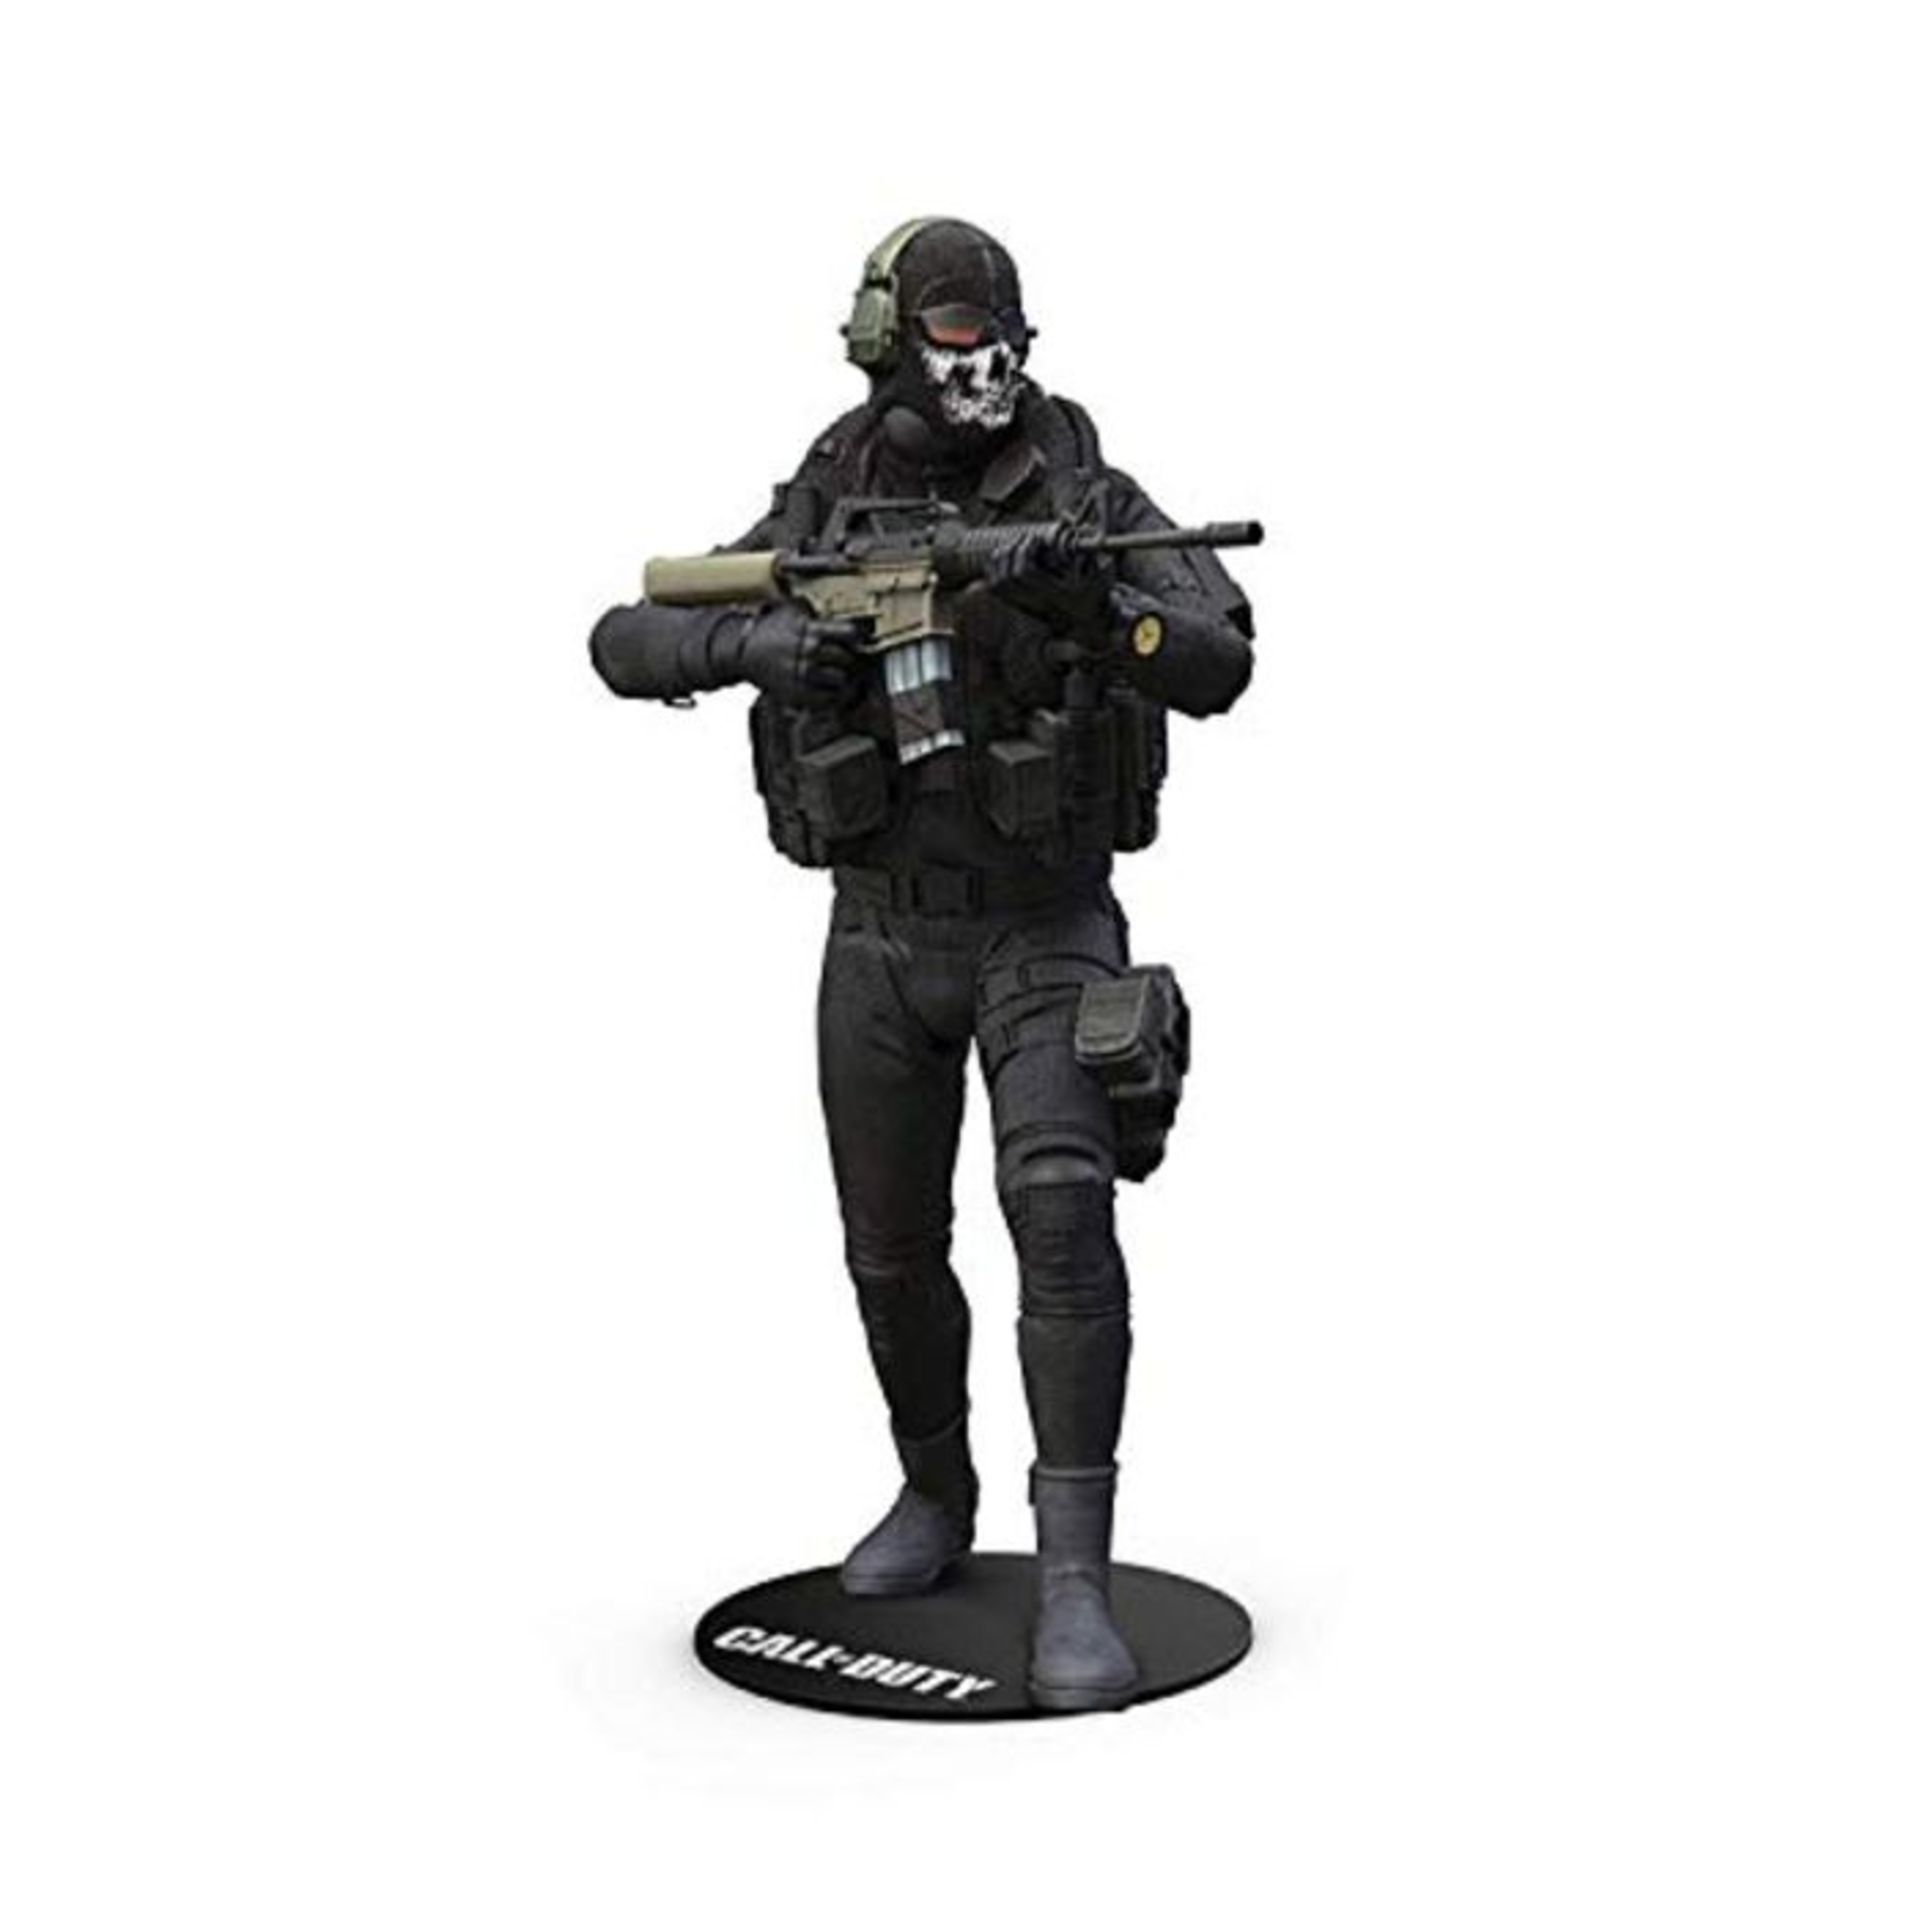 Call of Duty 10401 Ghost Action Figure, Black, Grey